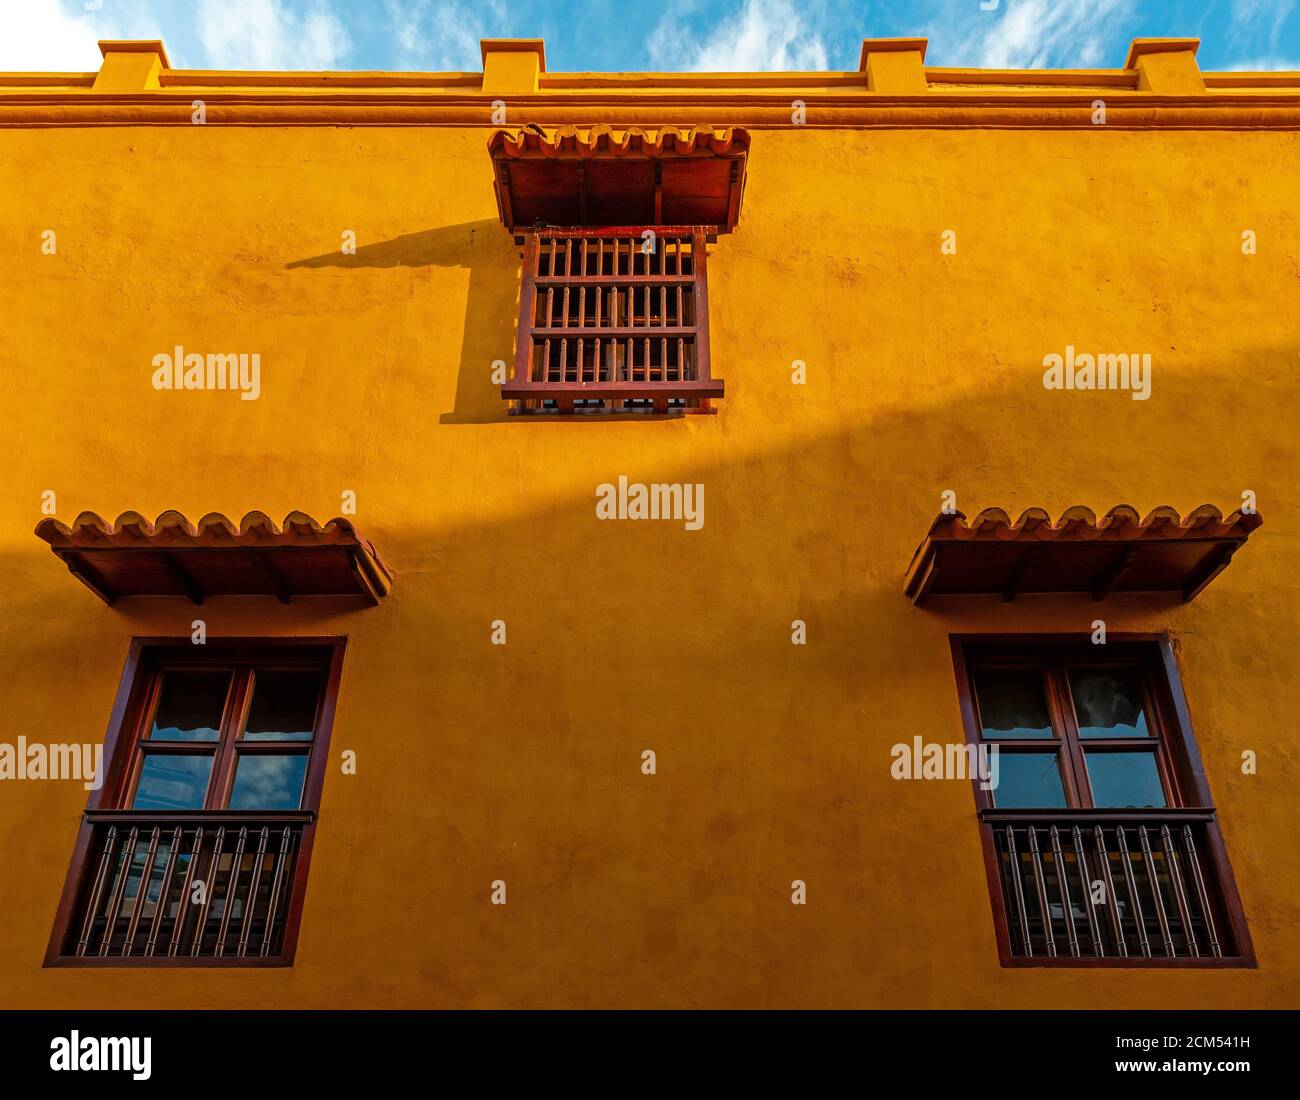 Orange facade with windows in colonial style, Cartagena, Colombia. Stock Photo